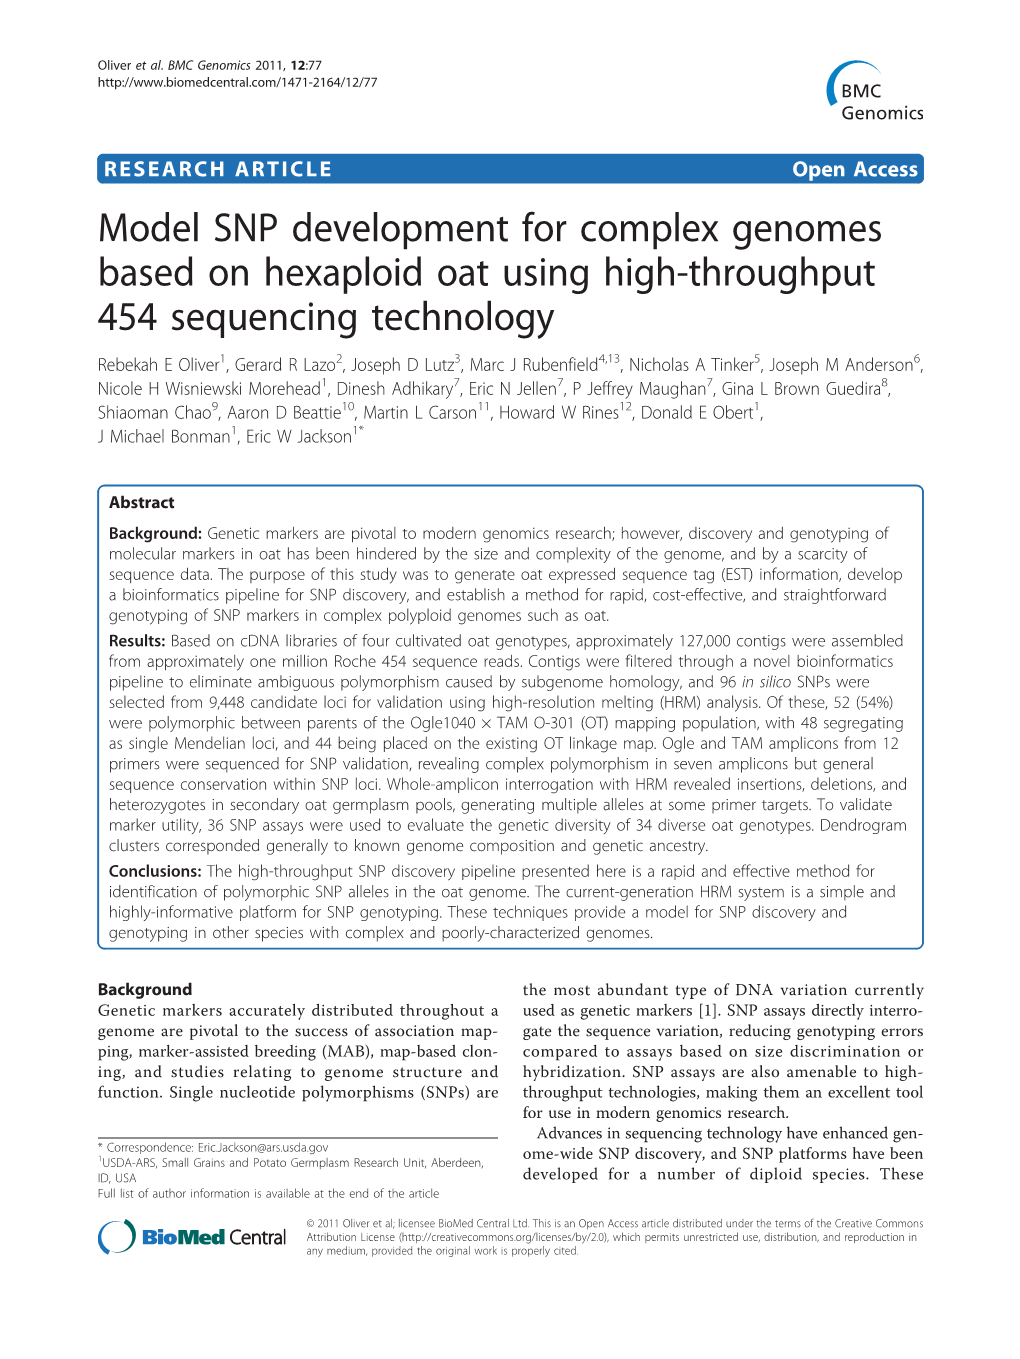 Model SNP Development for Complex Genomes Based on Hexaploid Oat